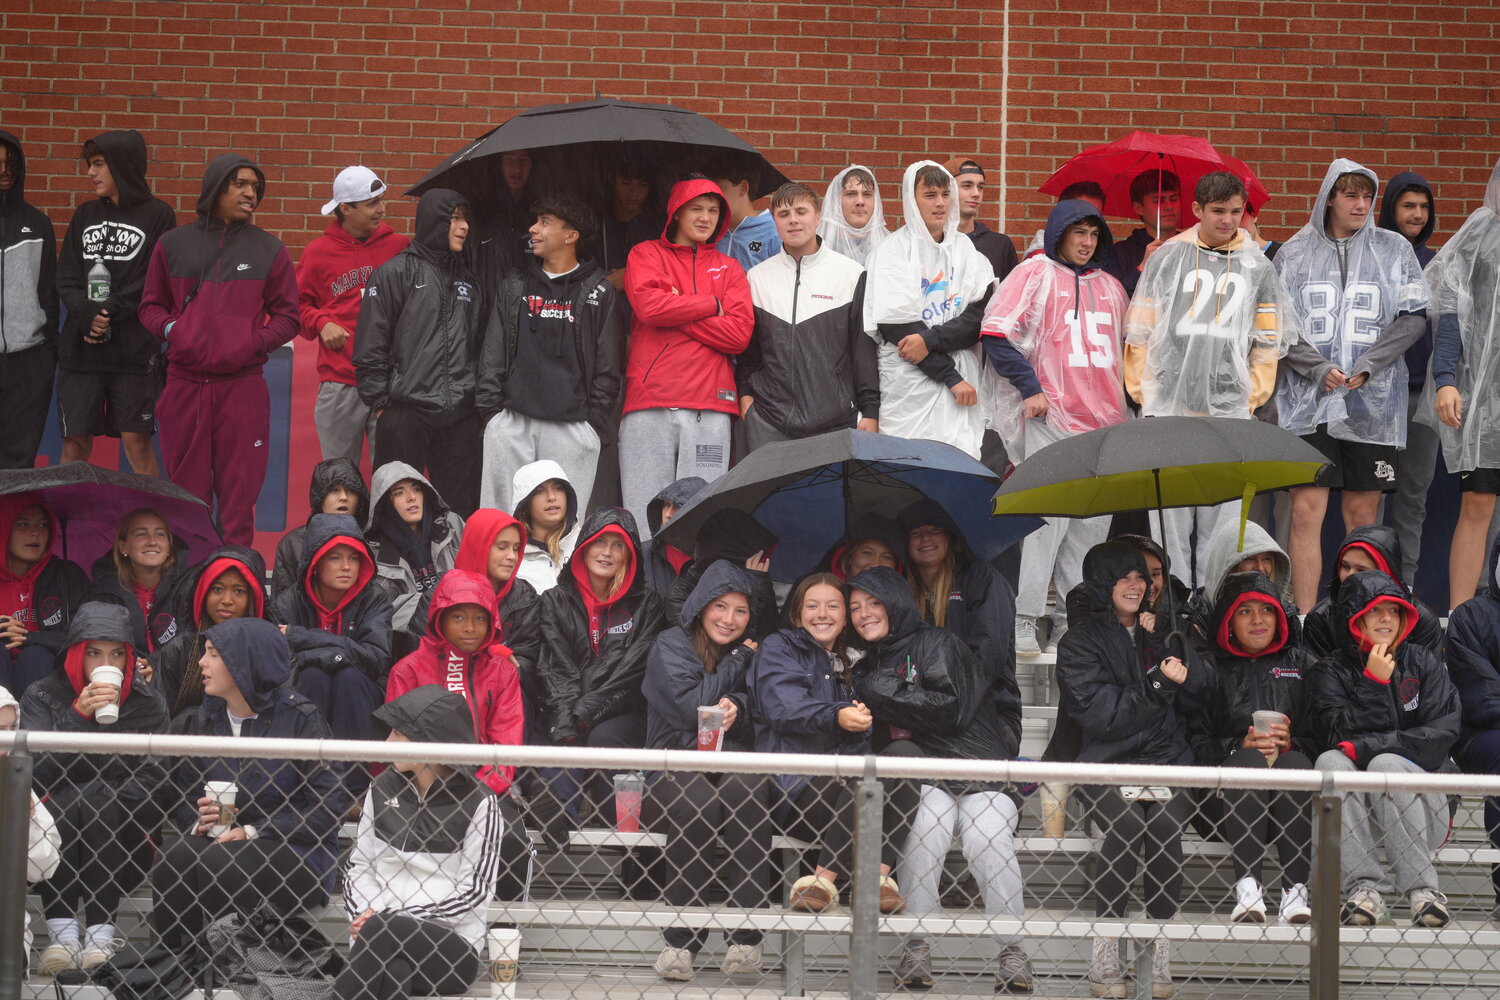 South Side High students showing their support during the Homecoming game on Saturday.